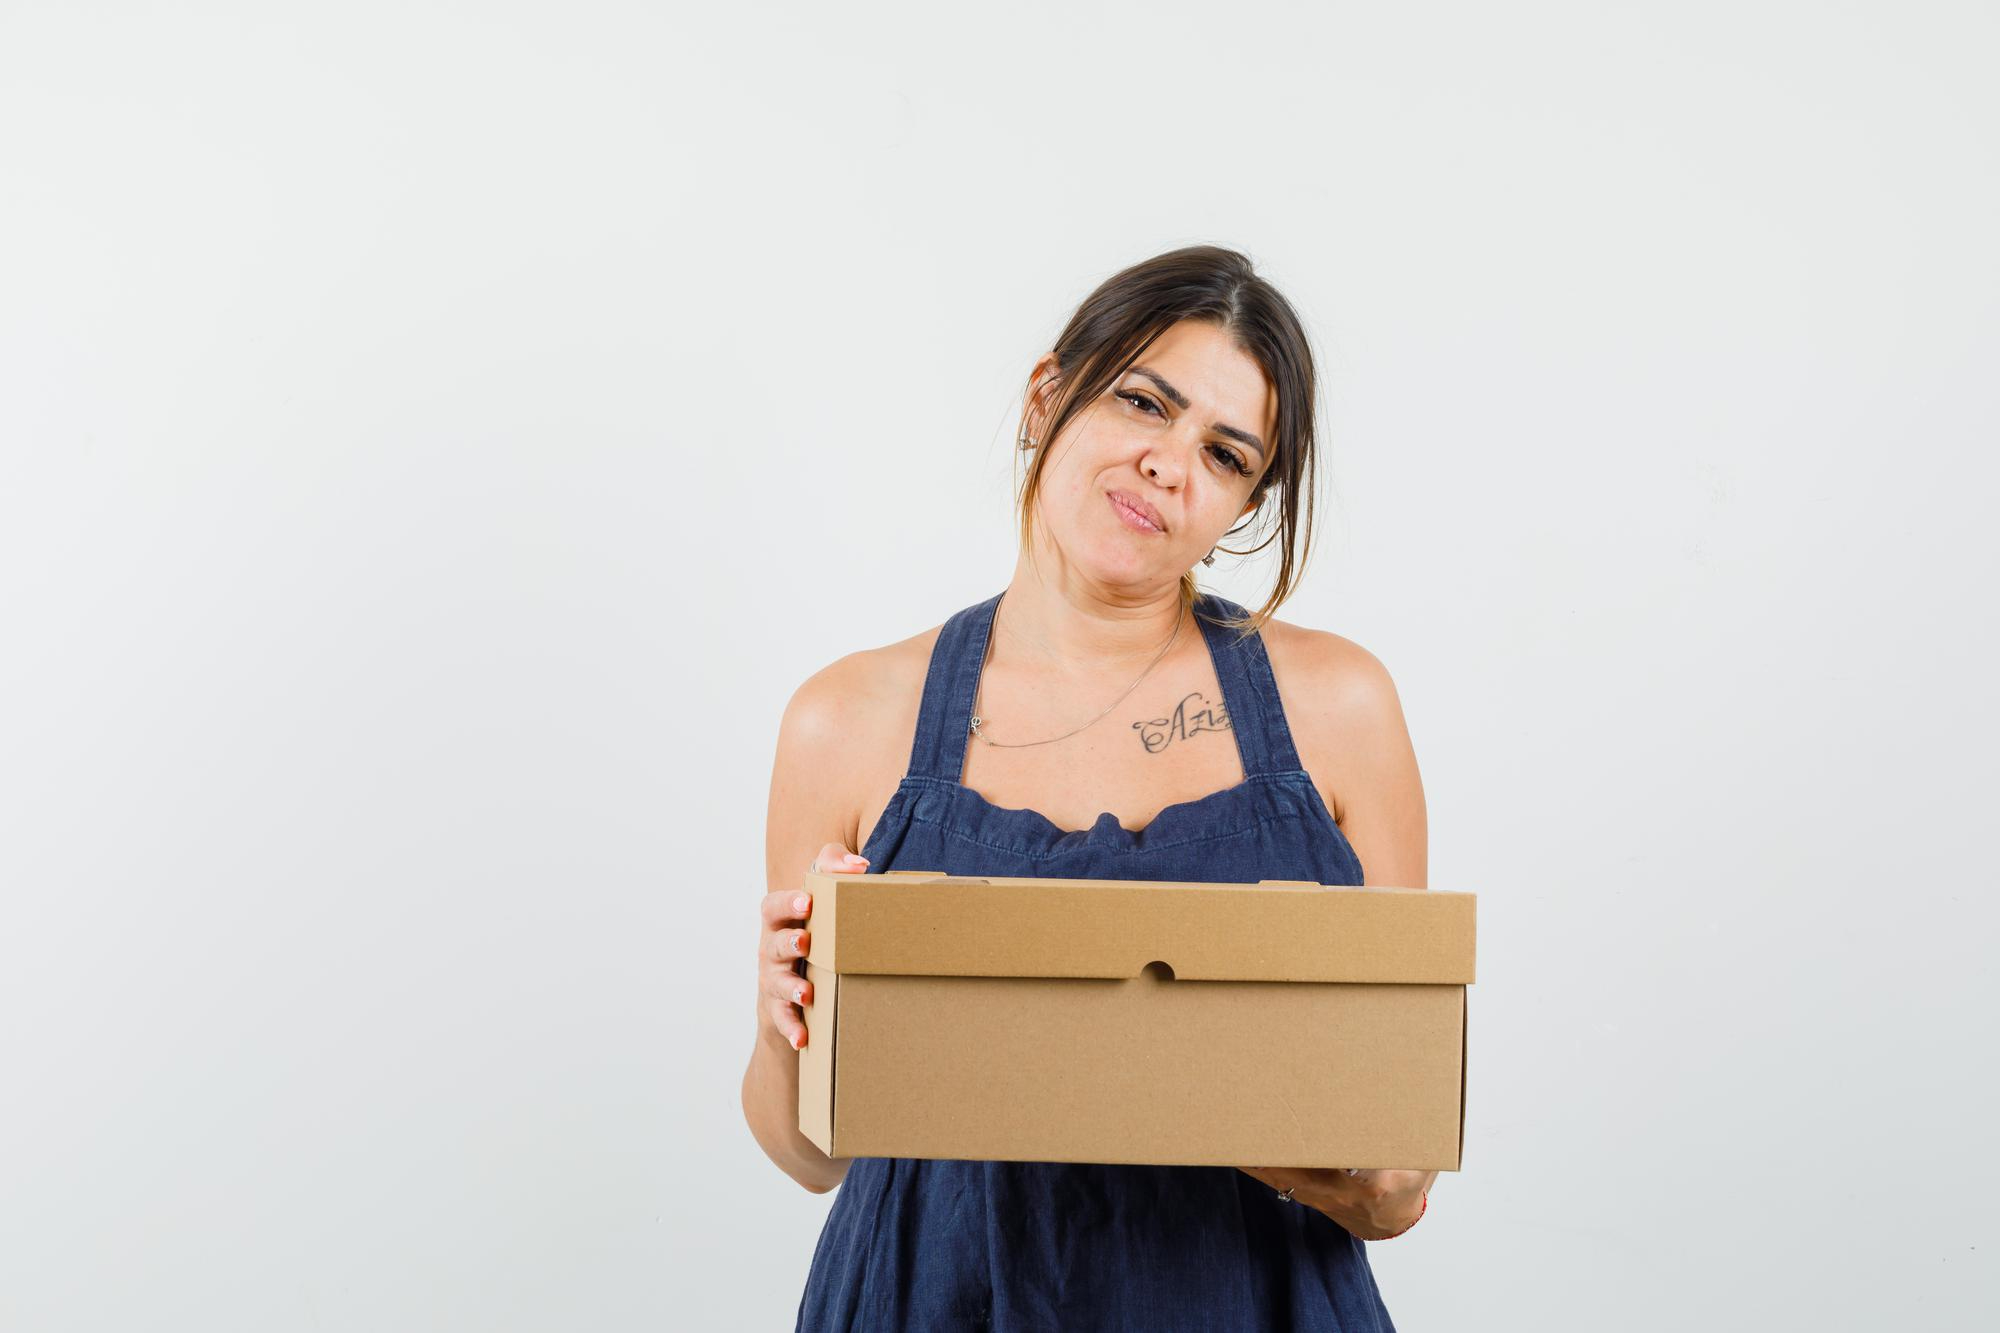 A young woman looking unimpressed while holding a package | Source: Freepik